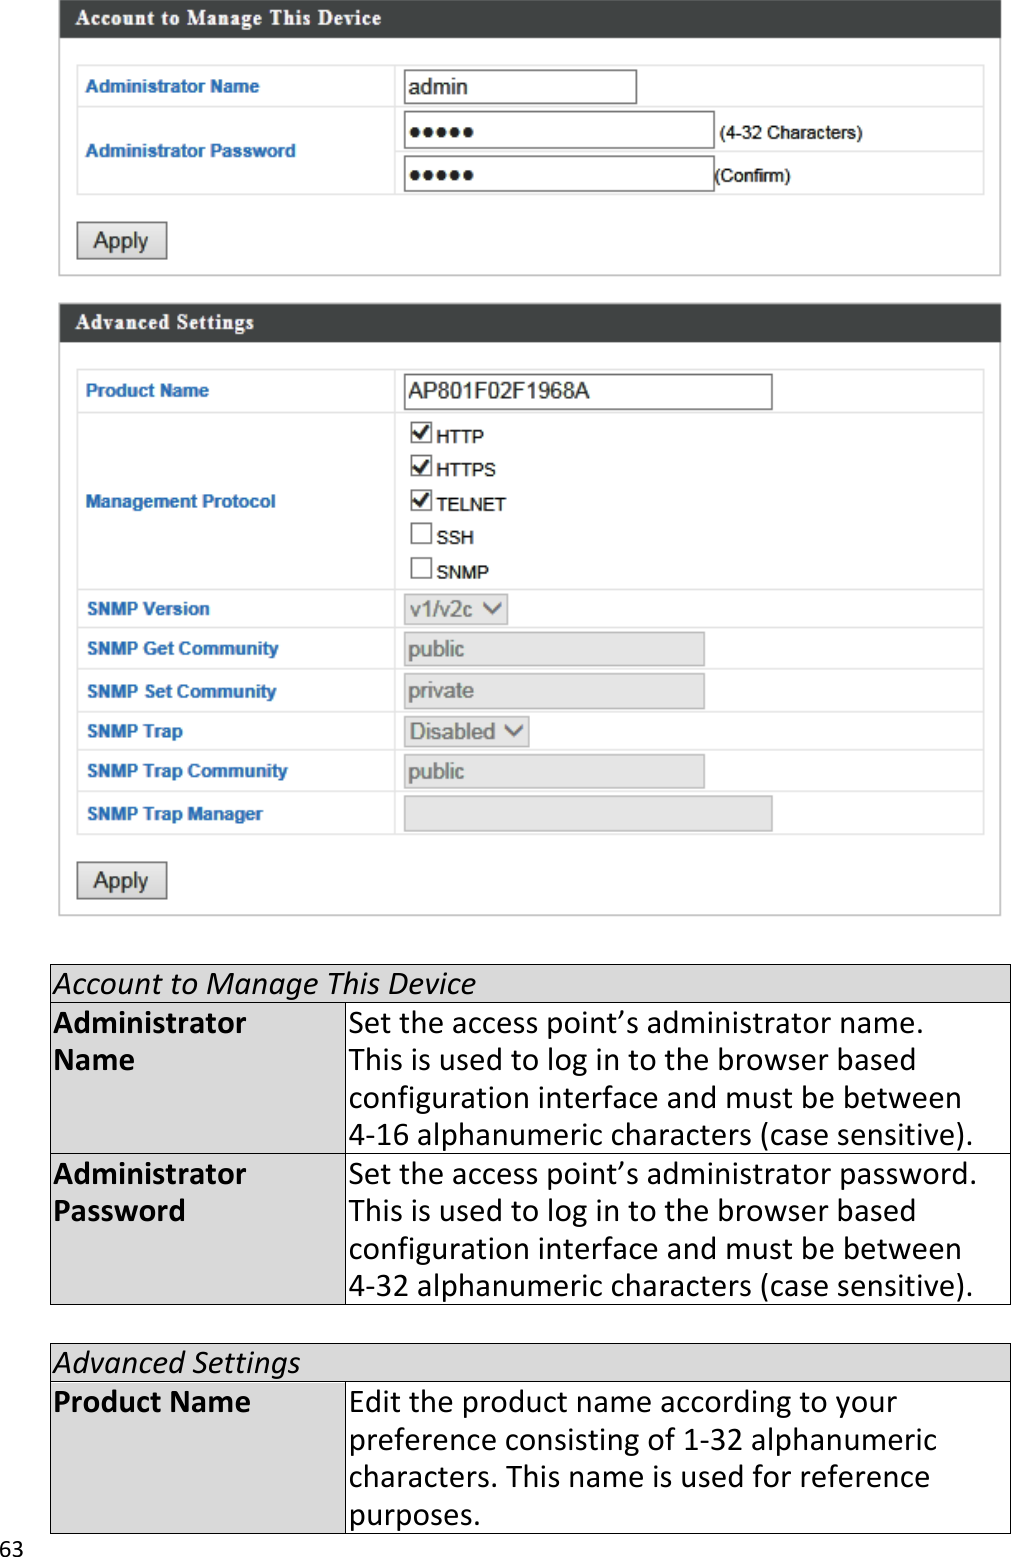 63    Account to Manage This Device Administrator Name Set the access point’s administrator name. This is used to log in to the browser based configuration interface and must be between 4-16 alphanumeric characters (case sensitive). Administrator Password Set the access point’s administrator password. This is used to log in to the browser based configuration interface and must be between 4-32 alphanumeric characters (case sensitive).  Advanced Settings Product Name Edit the product name according to your preference consisting of 1-32 alphanumeric characters. This name is used for reference purposes. 